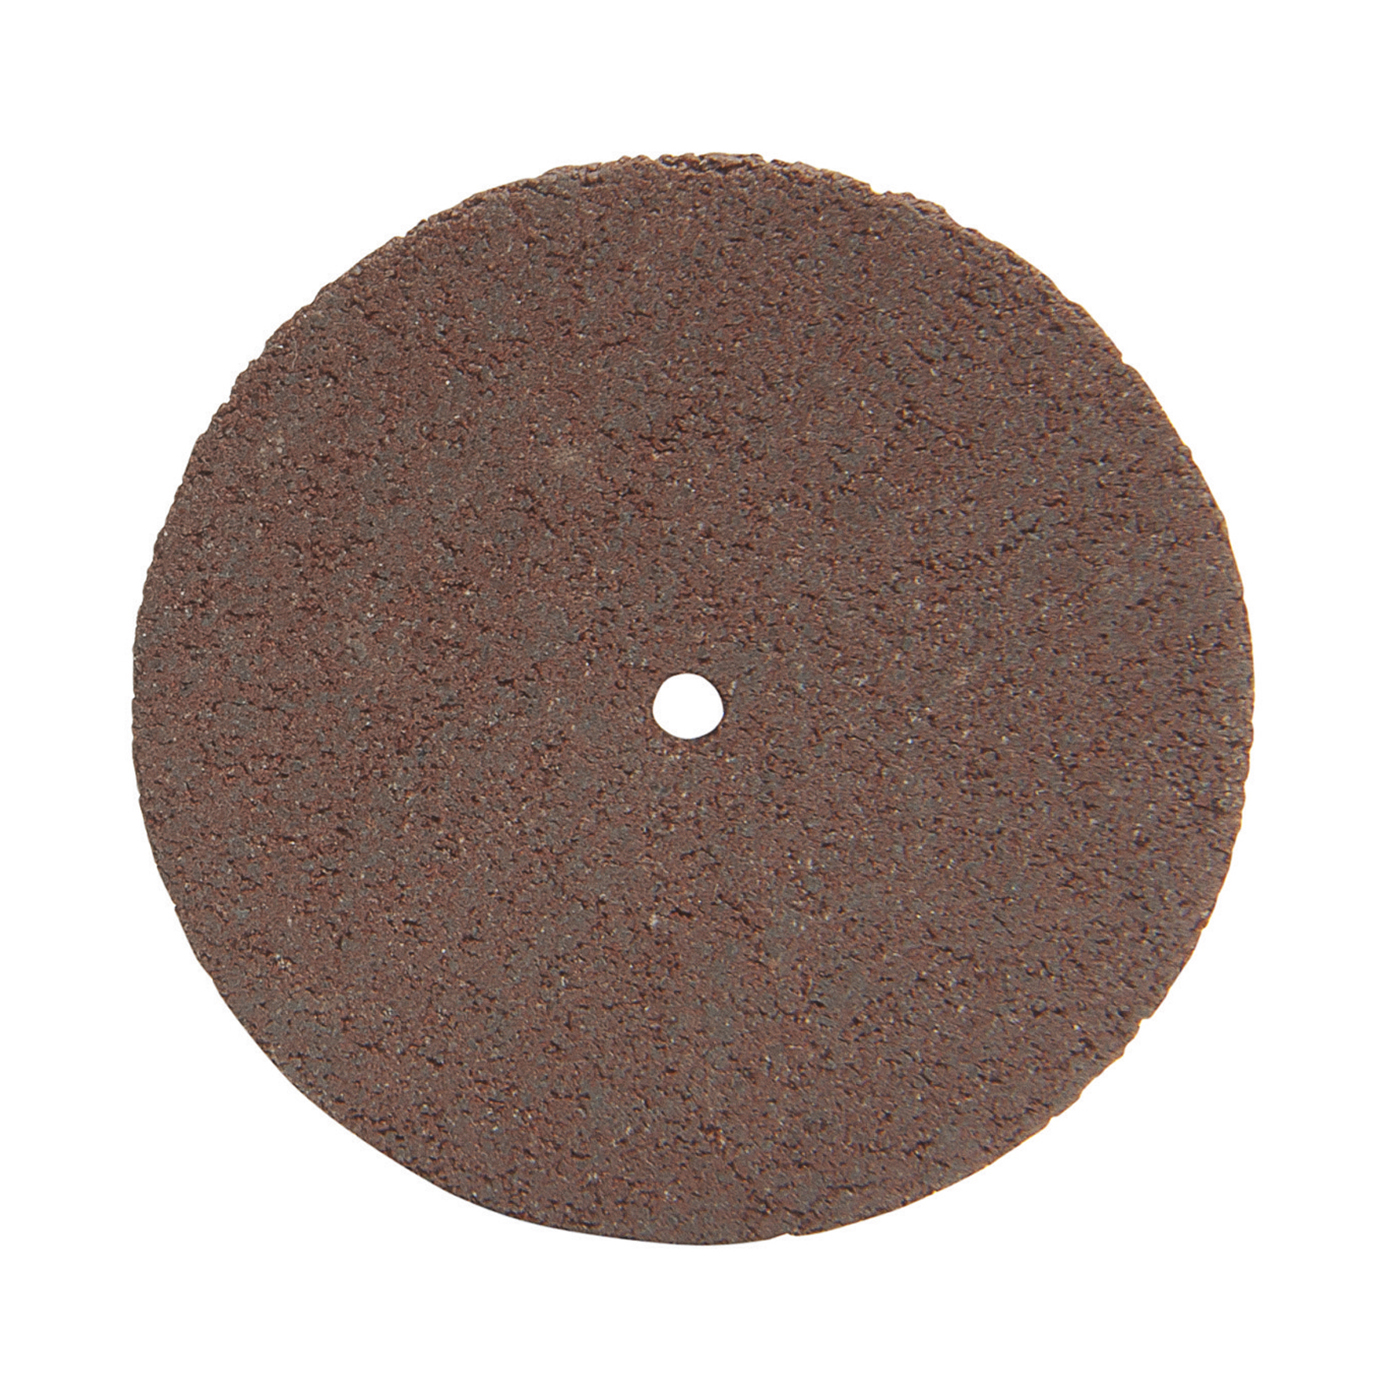 FINODISC GRIND Grinding Discs, ø 35 x 1.7 mm, Trial Pack - 2 pieces